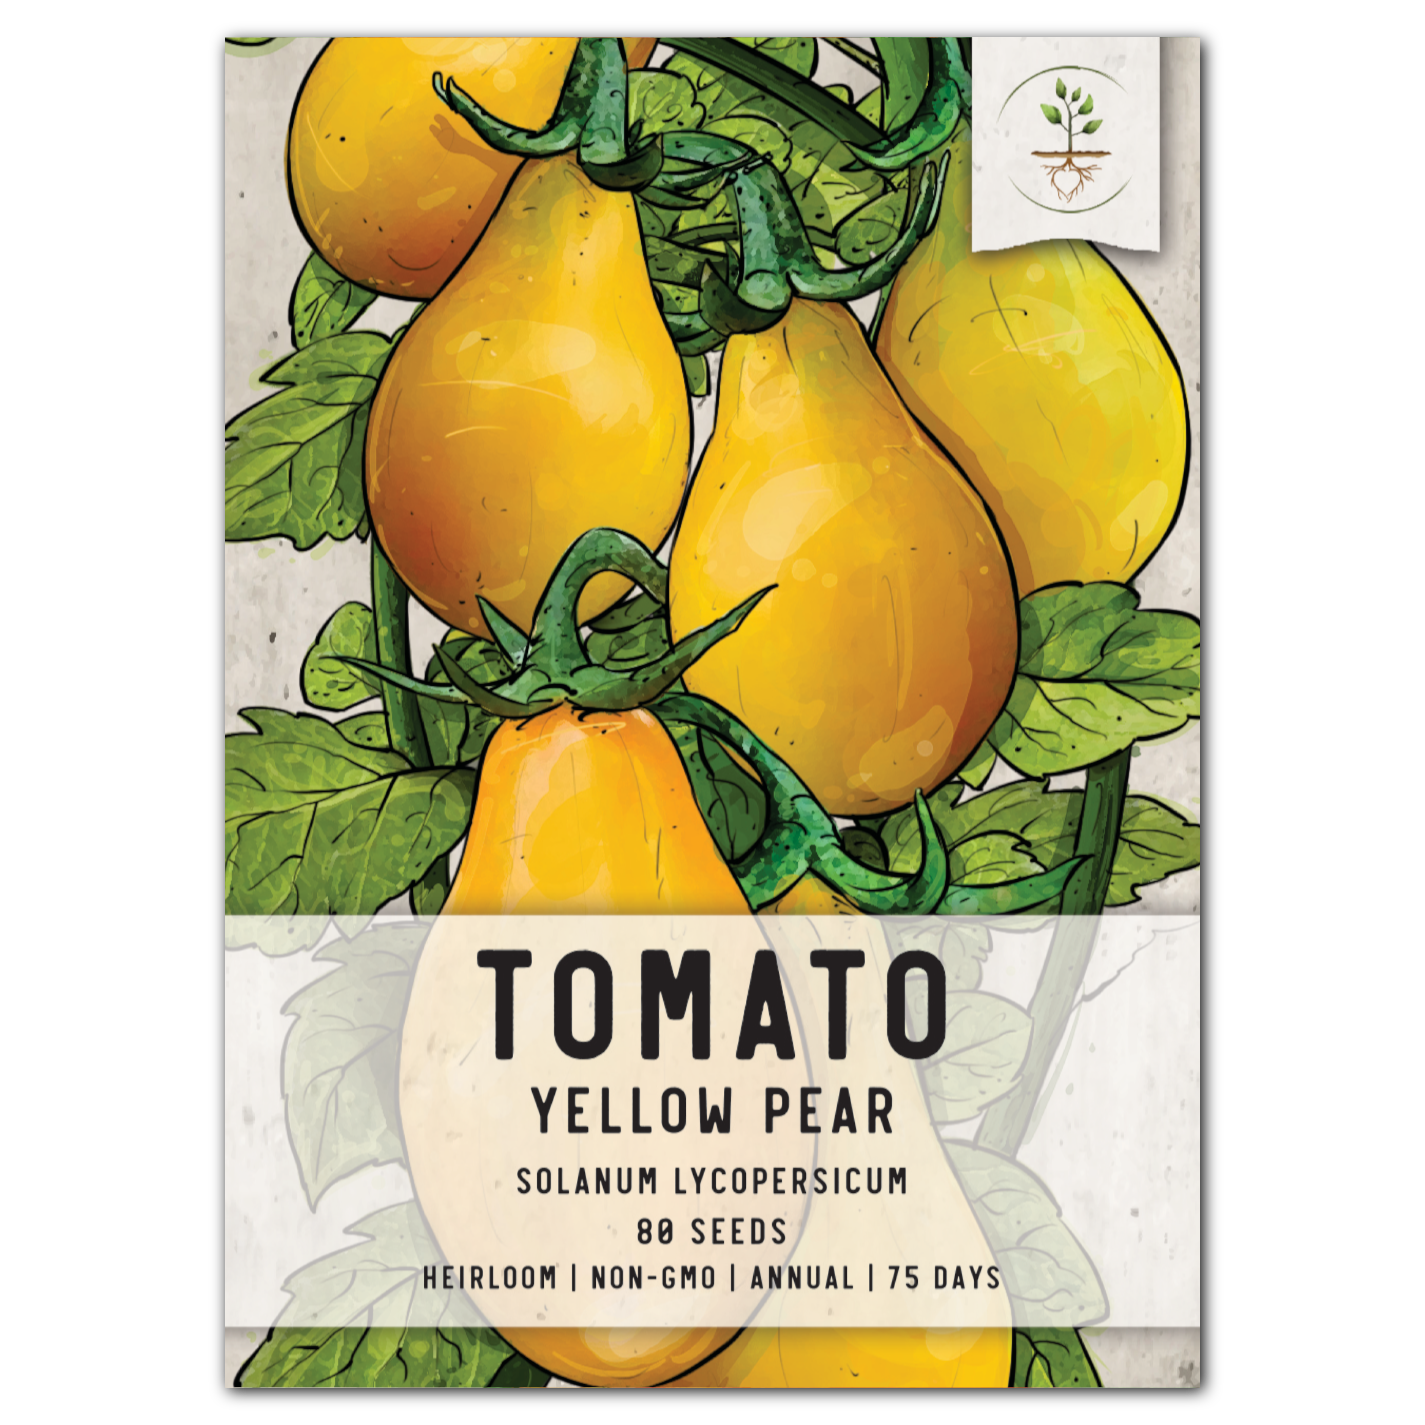 yellow pear tomato seeds for planting